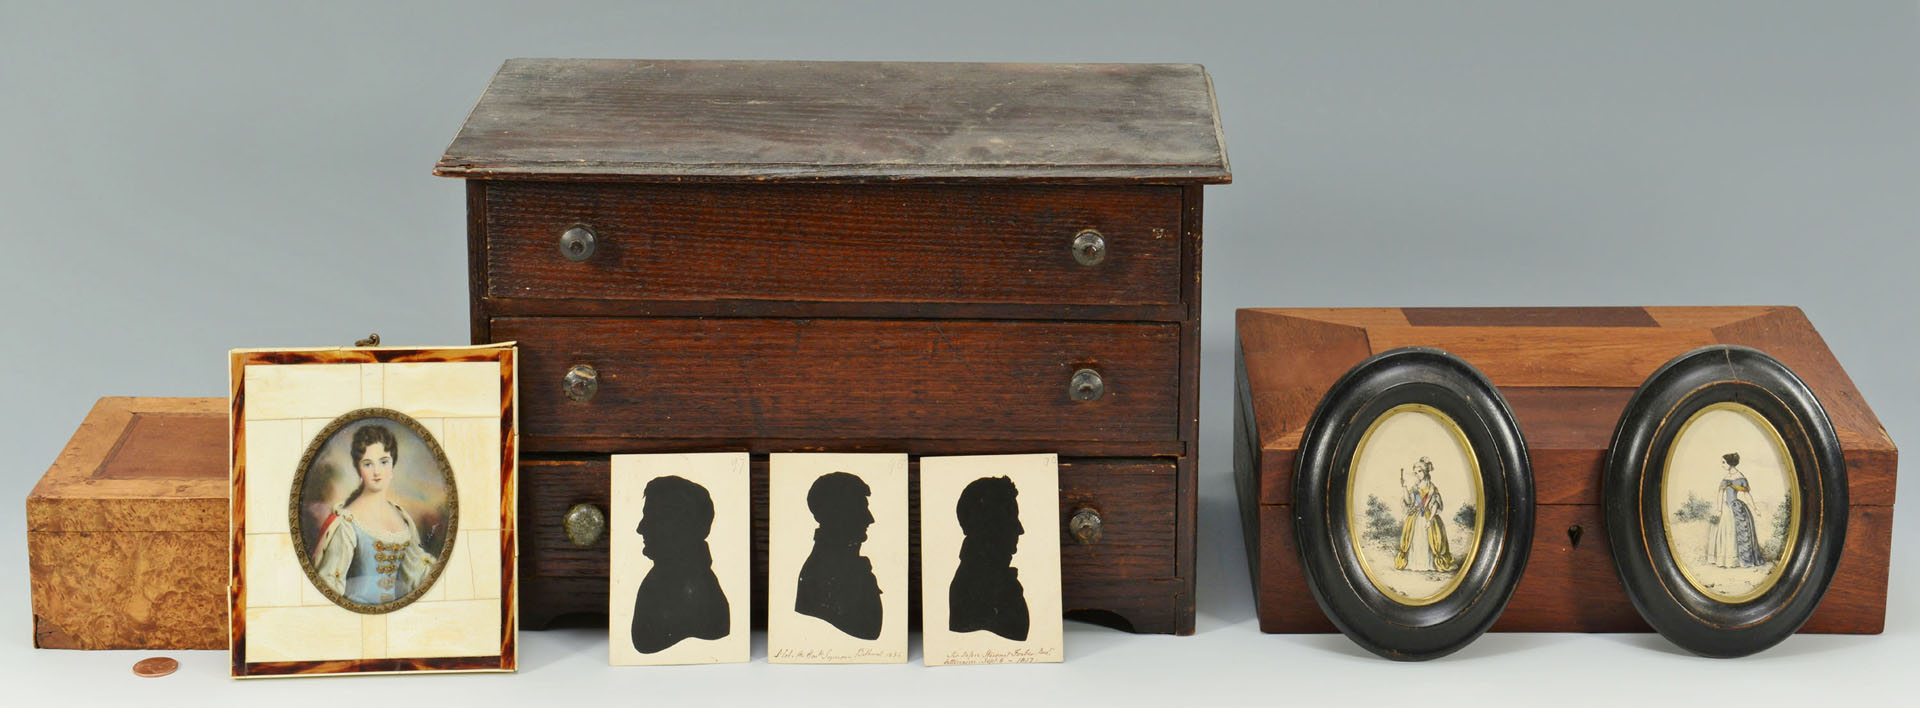 Lot 27: Grouping of 3 small chest, boxes, and silhouettes